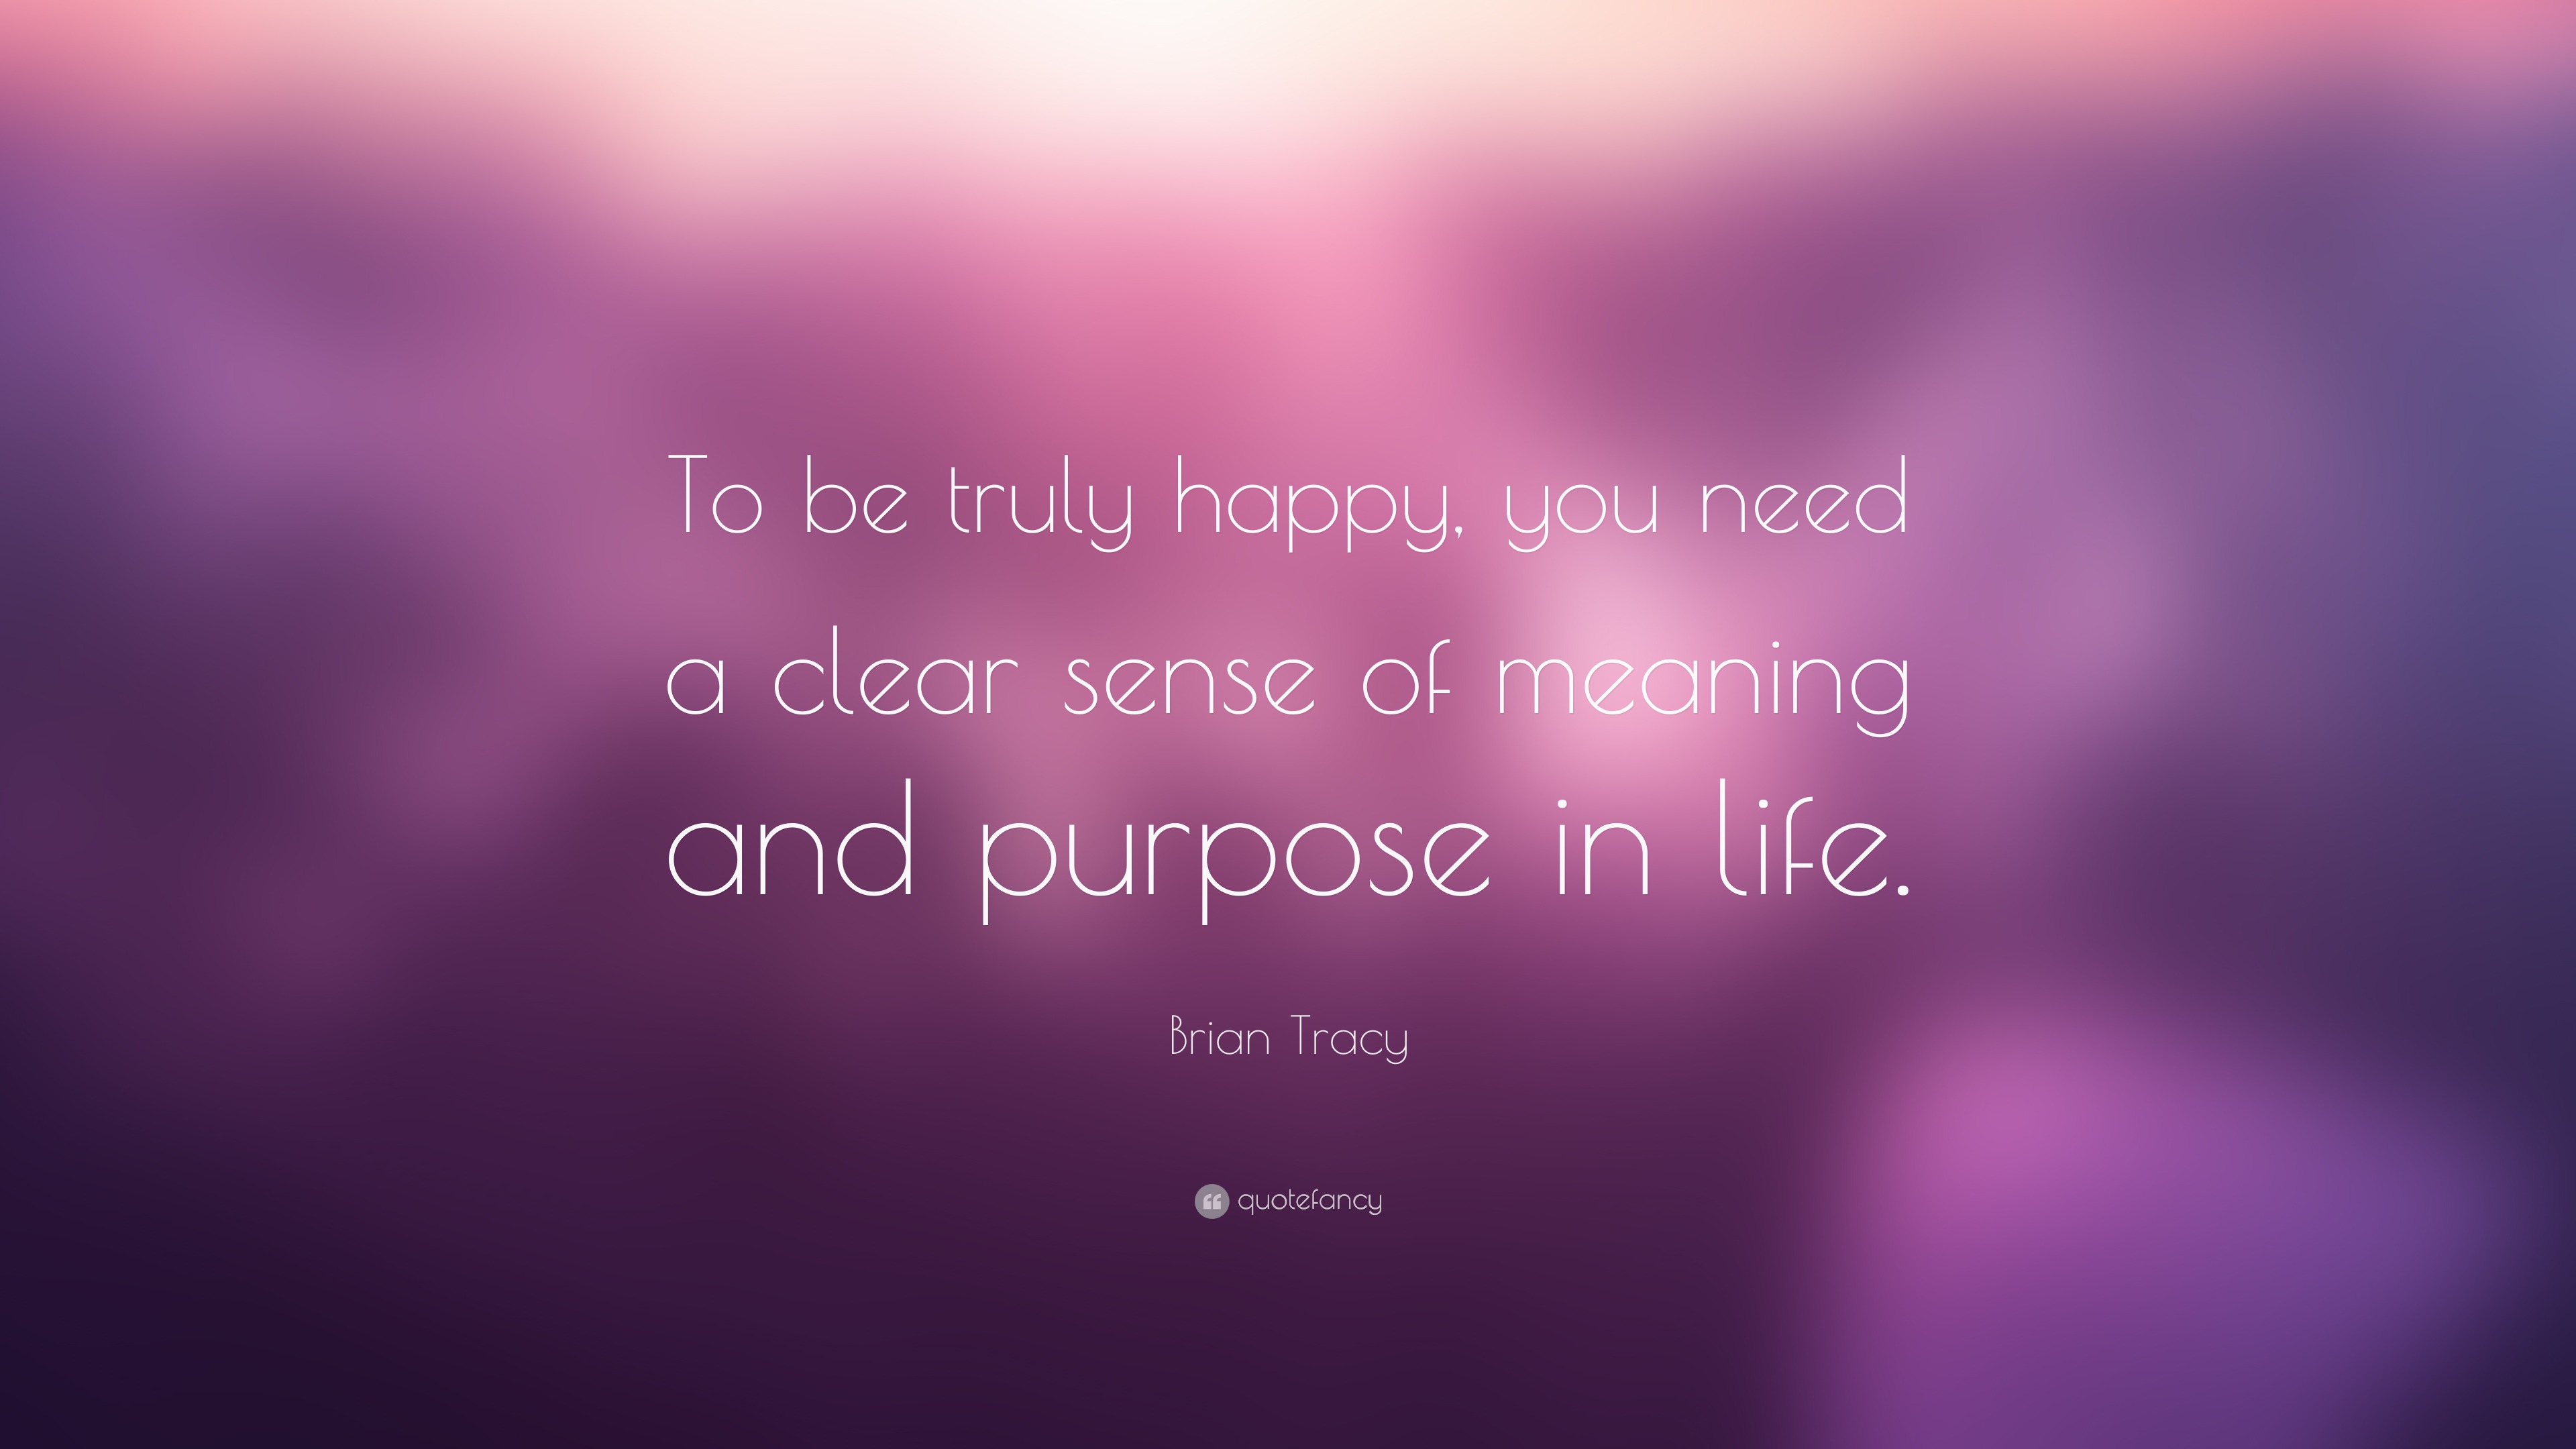 Brian Tracy Quote: “To be truly happy, you need a clear sense of ...